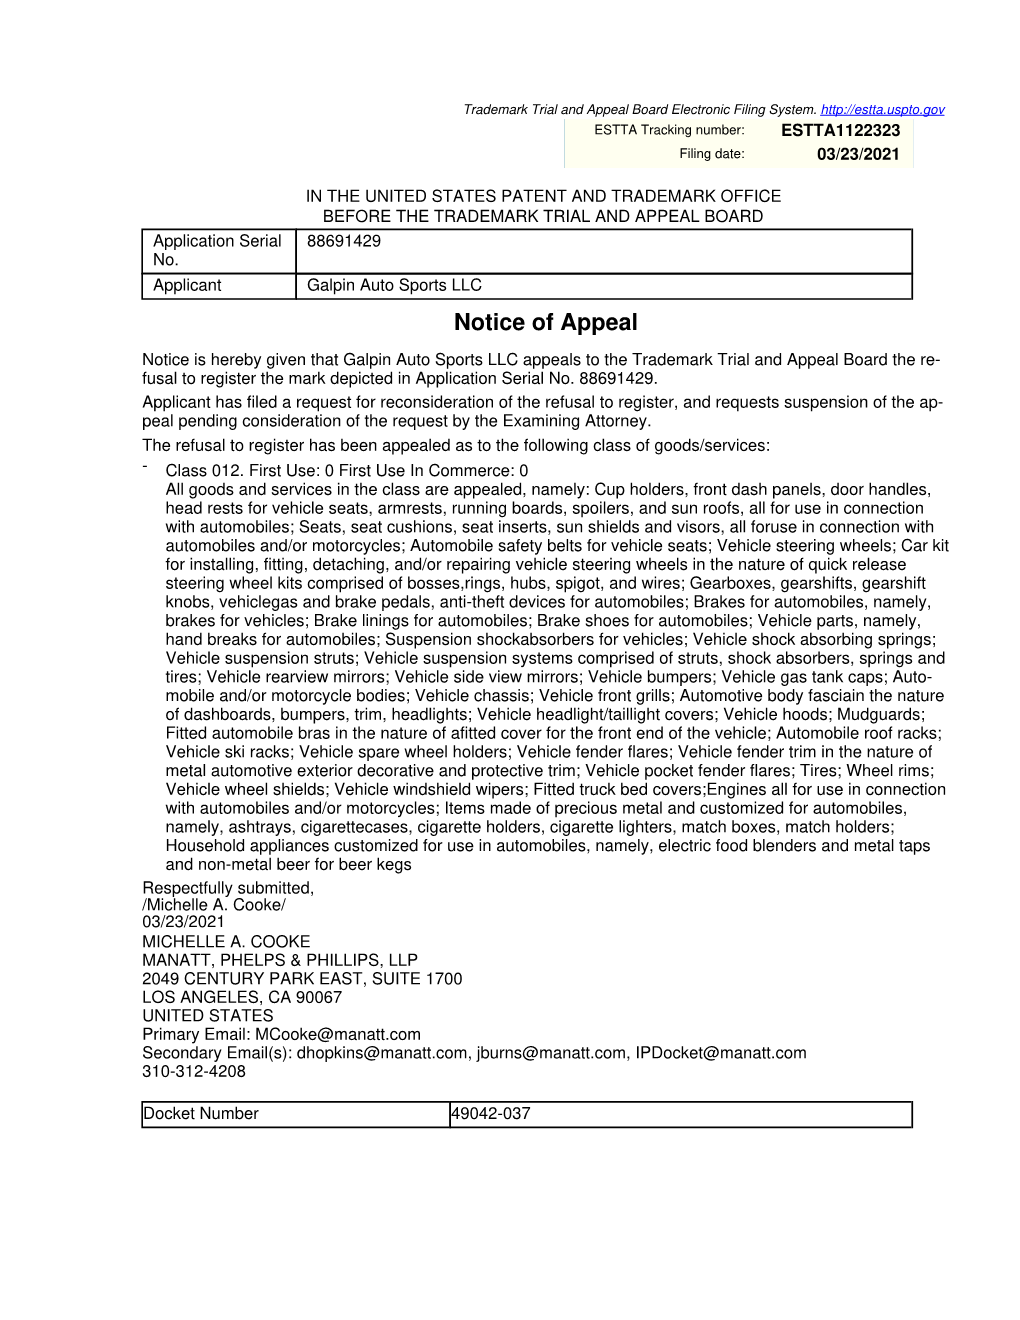 Notice of Appeal